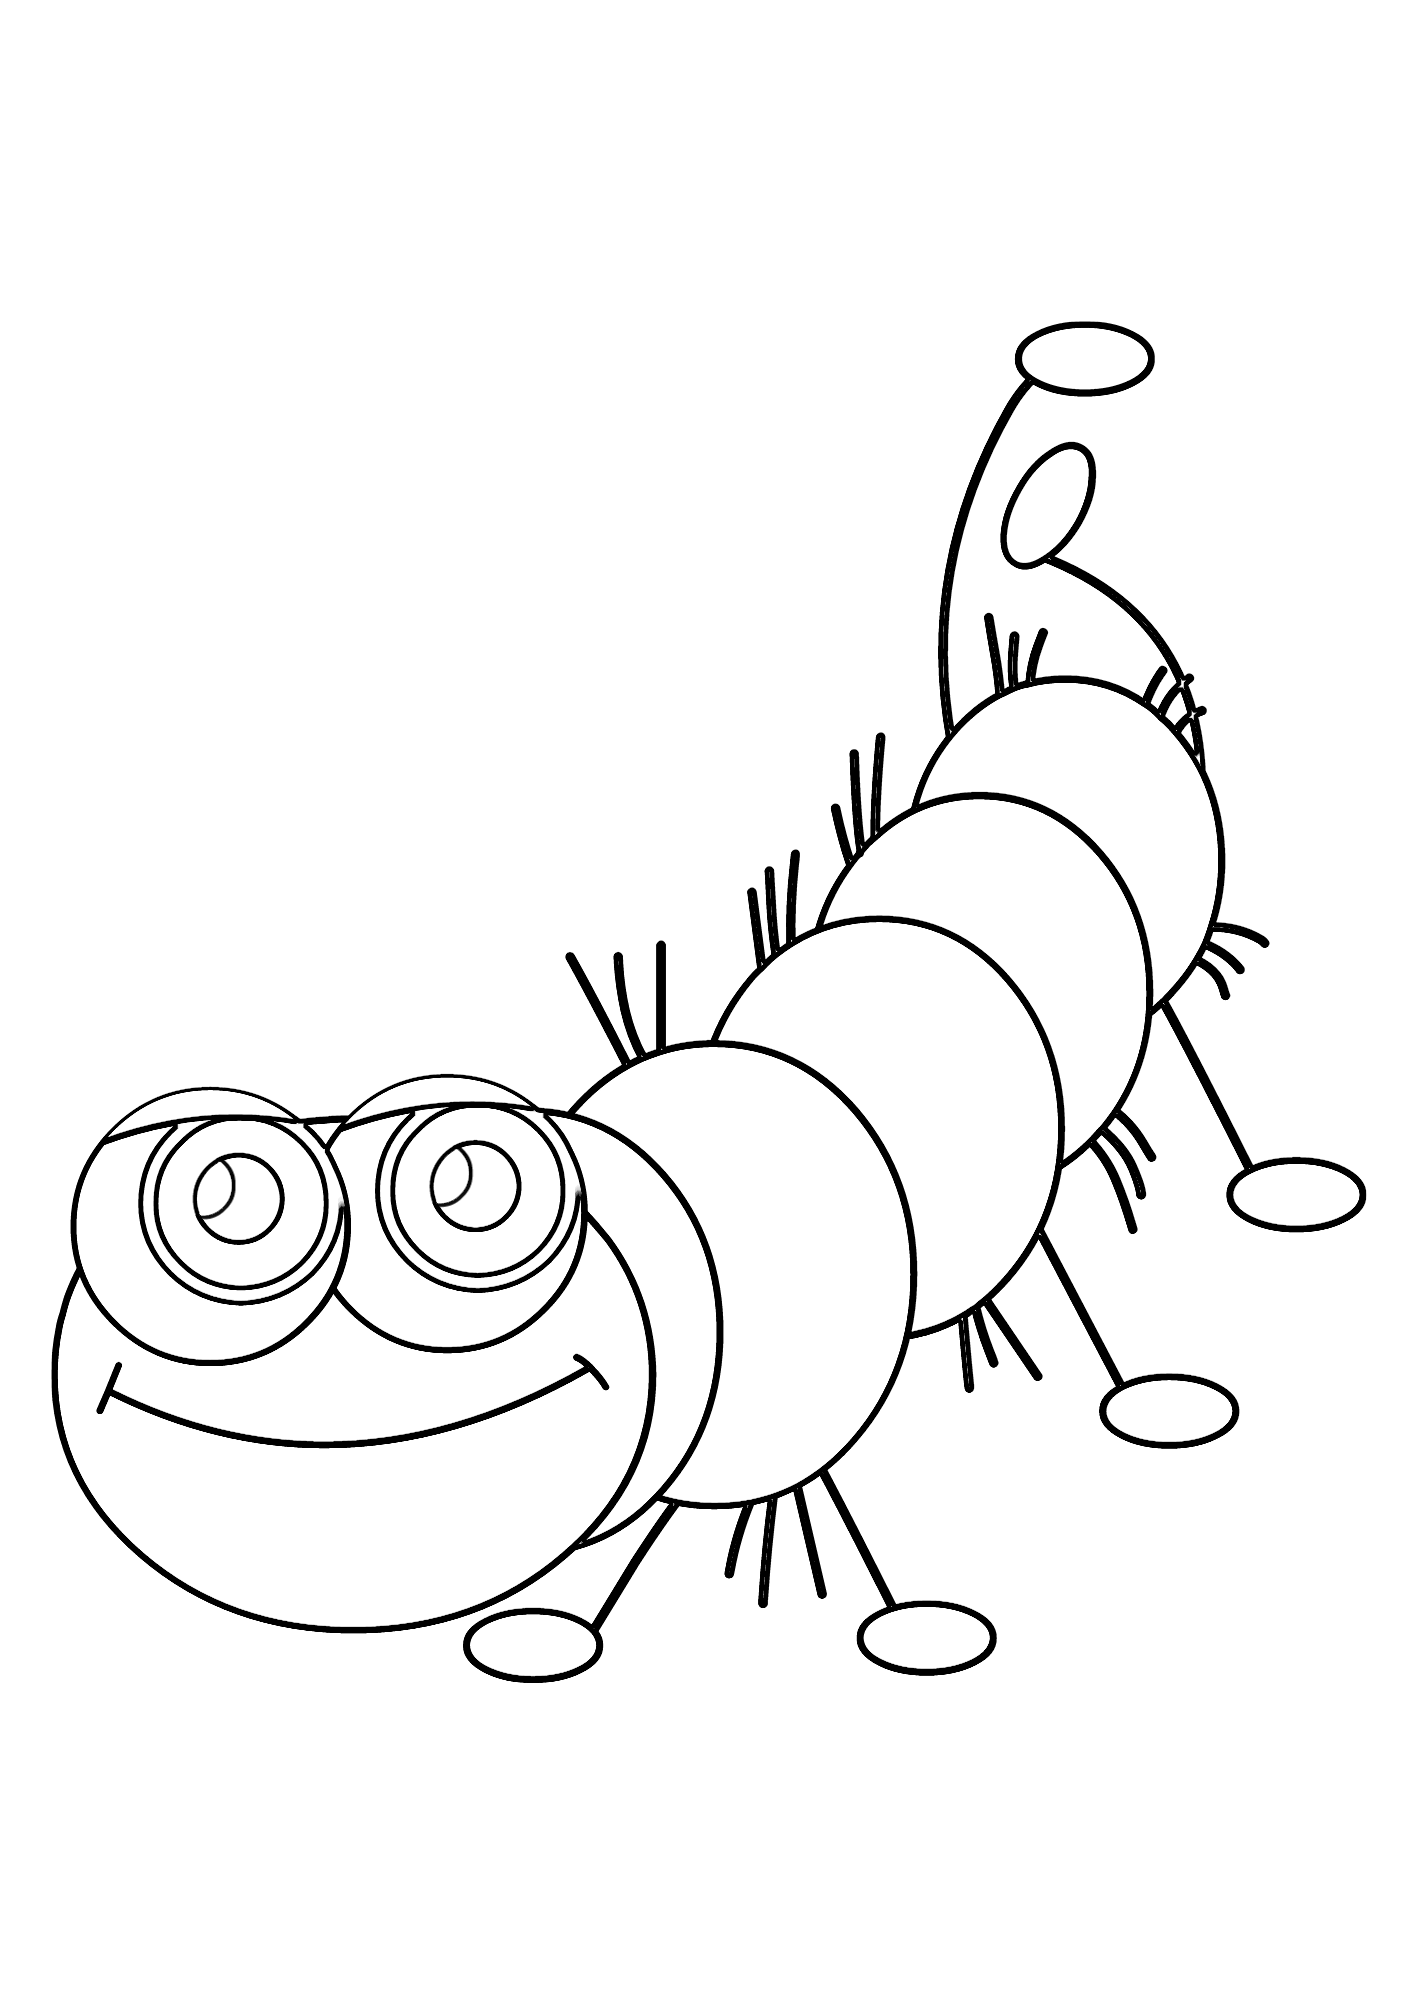 Centipedefor Kids Coloring Page